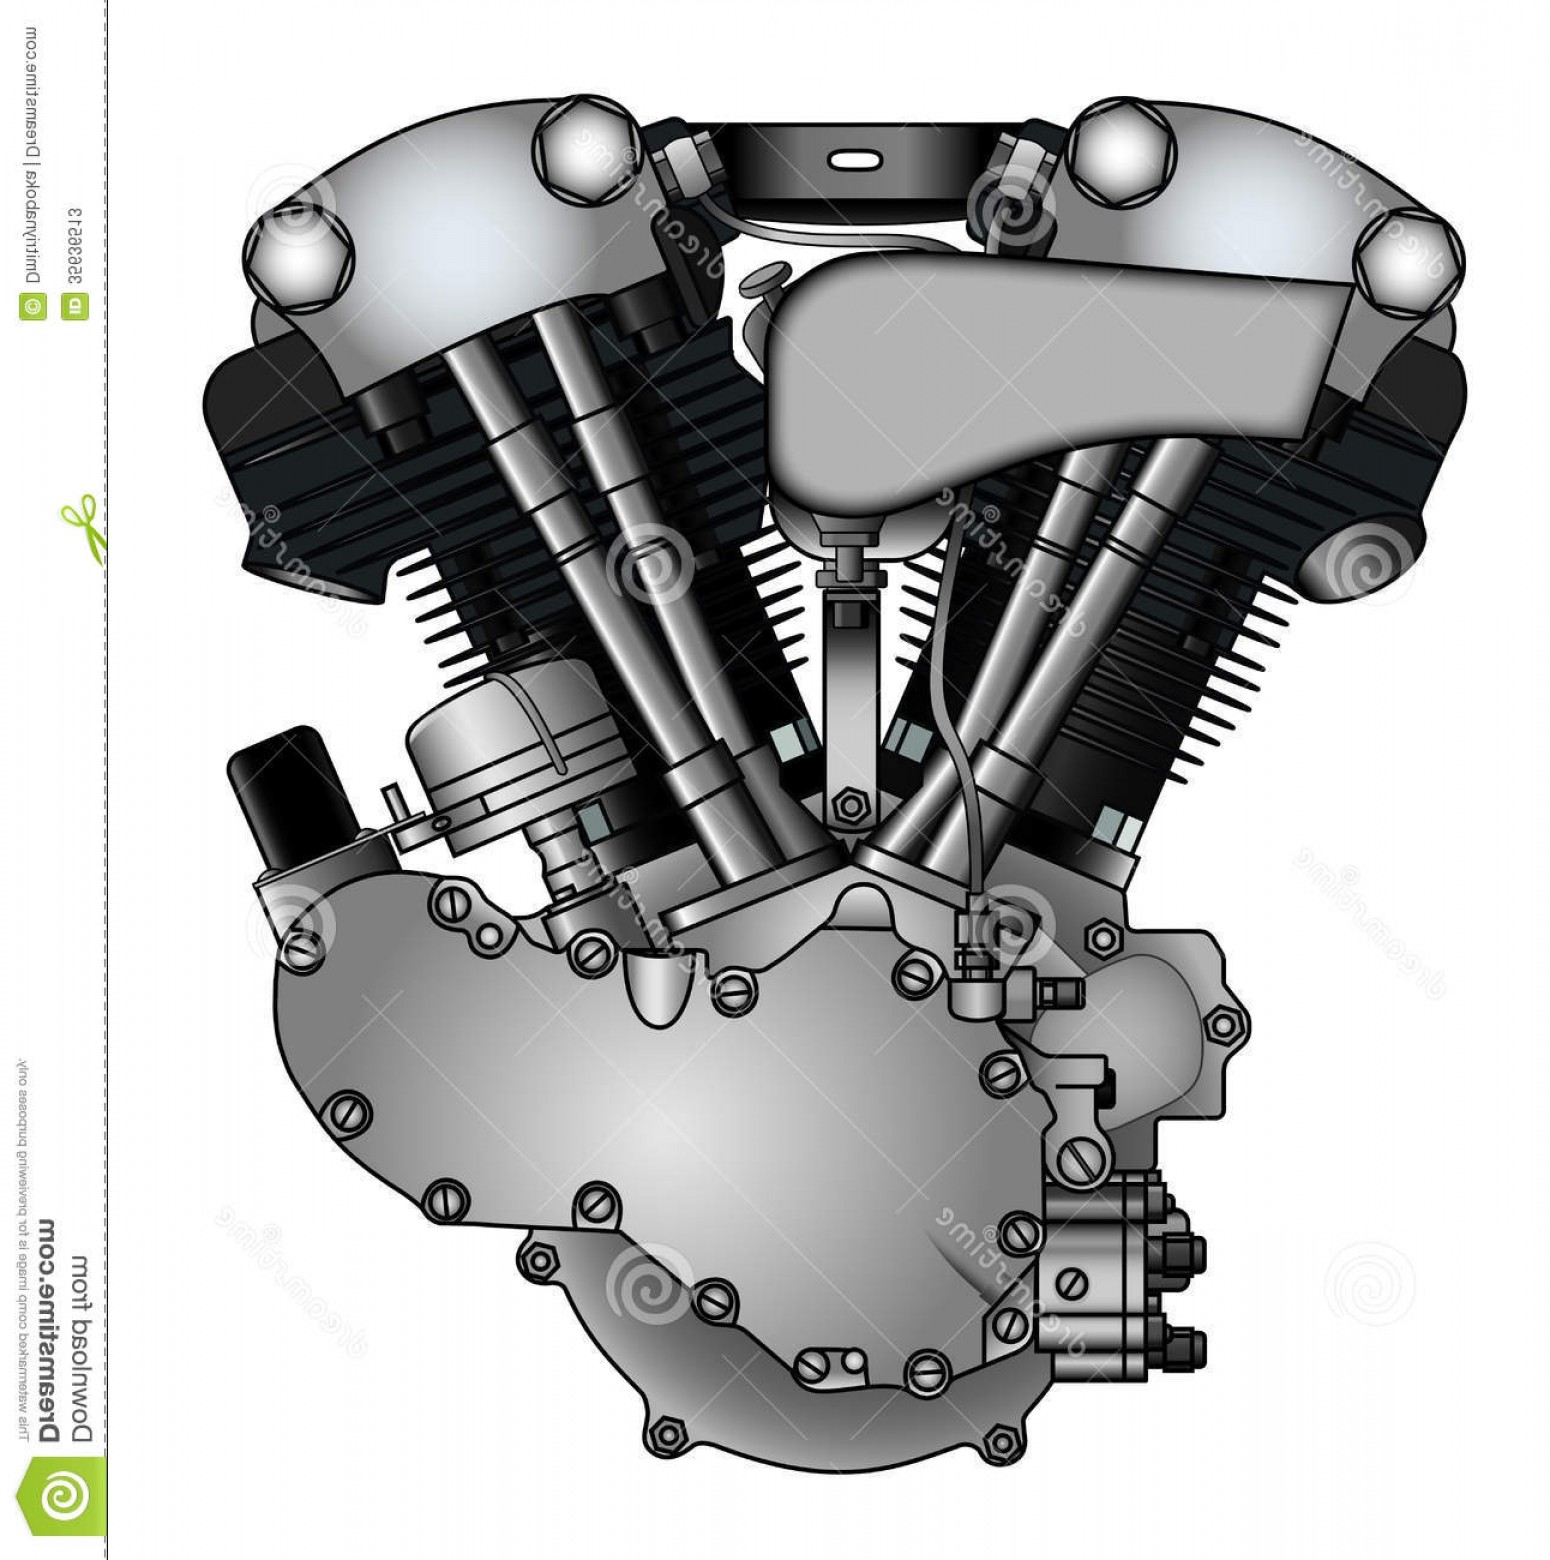 Motorcycle Engine Vector at GetDrawings.com | Free for personal use